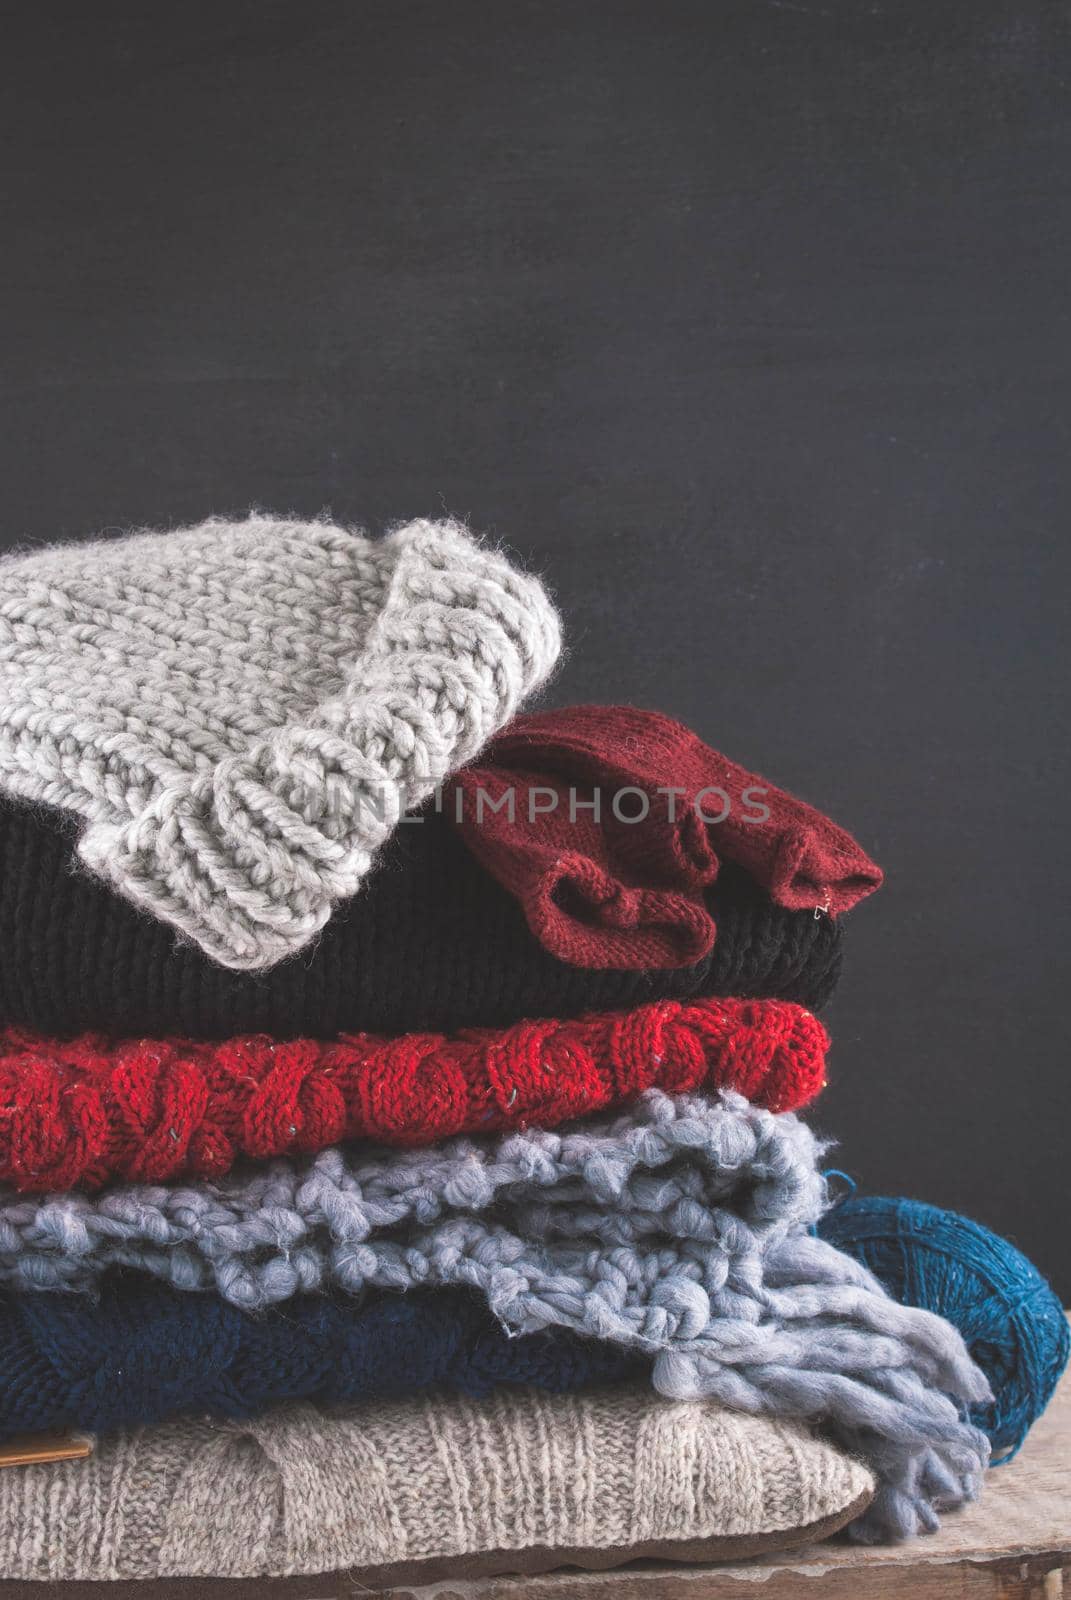 Knitted colorful and textured woven clothing on blackwooden background